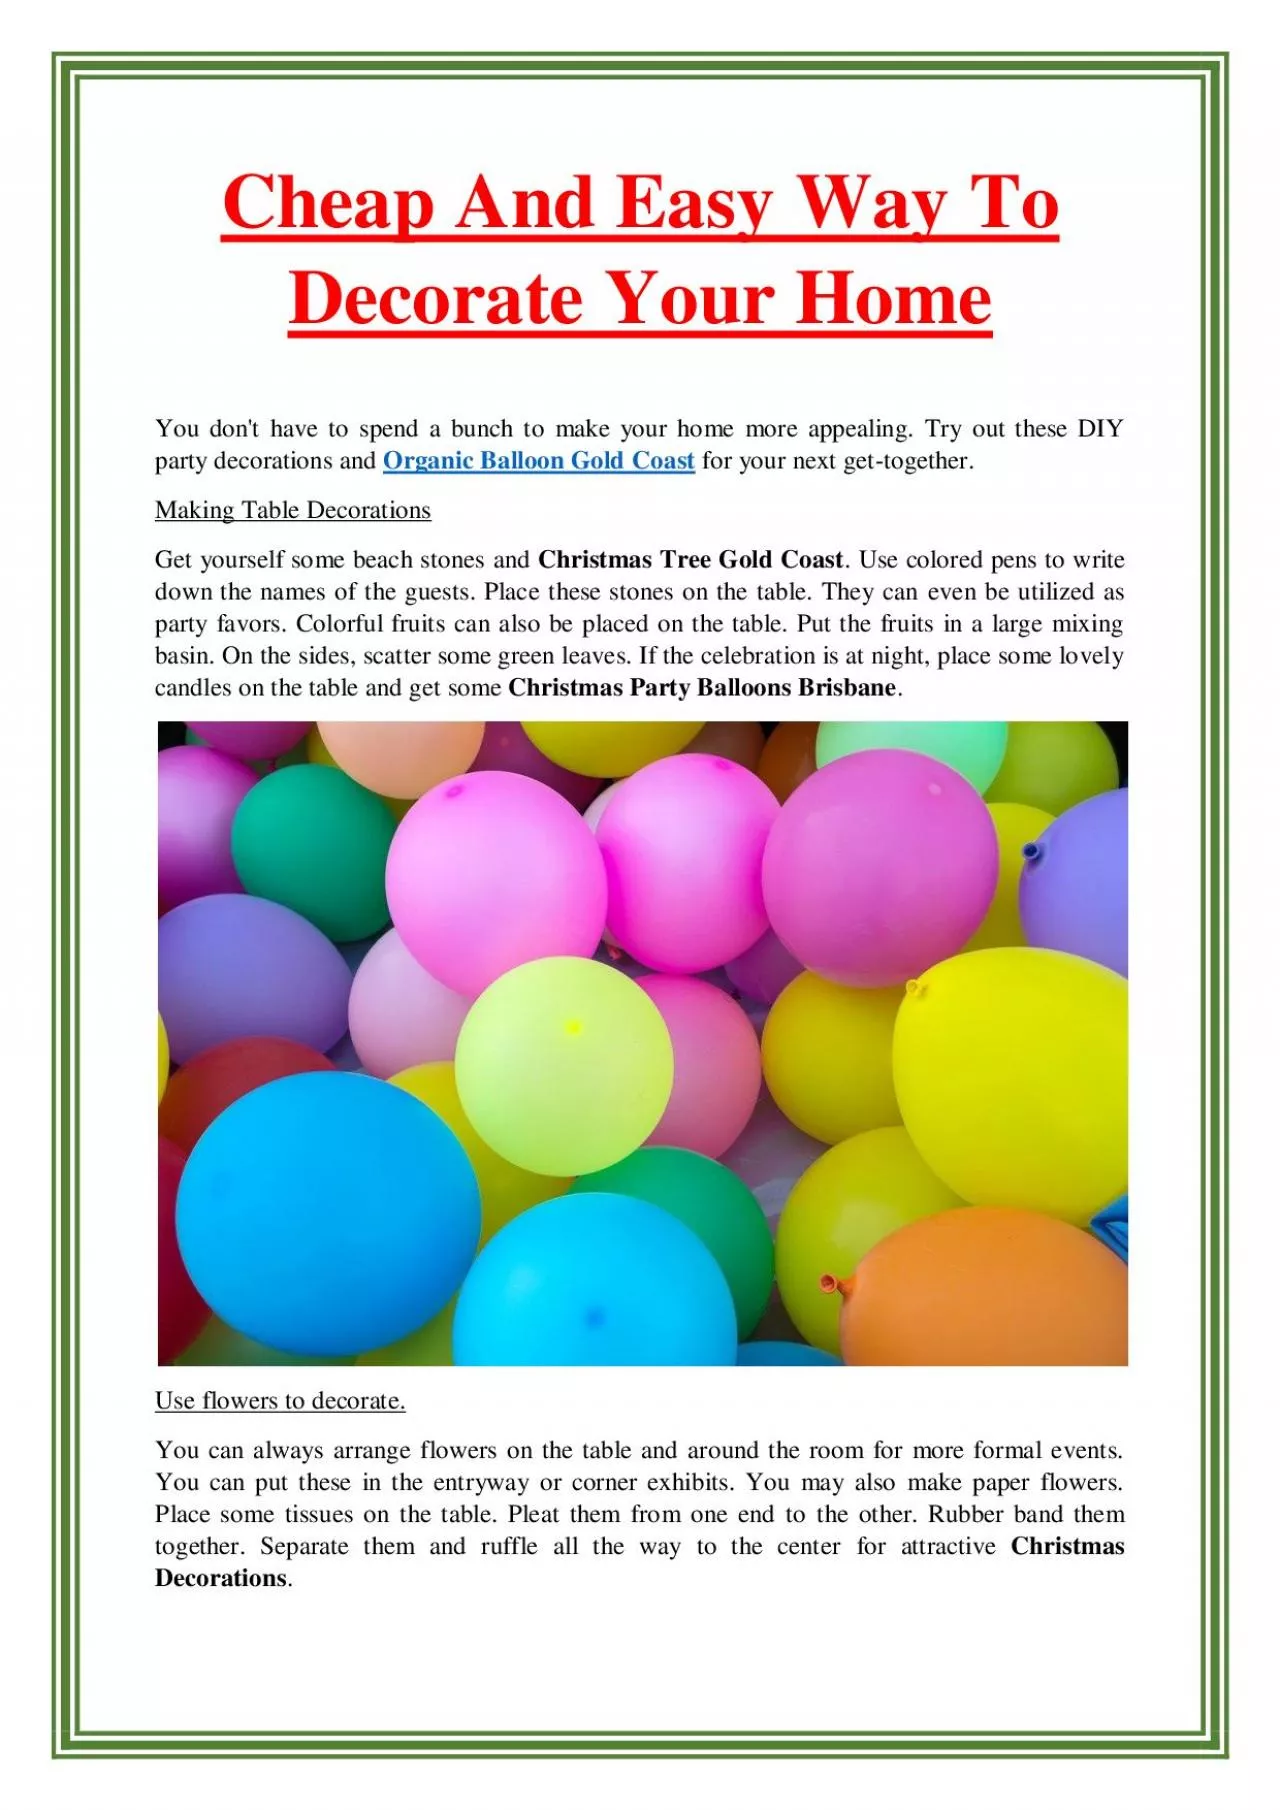 Cheap And Easy Way To Decorate Your Home